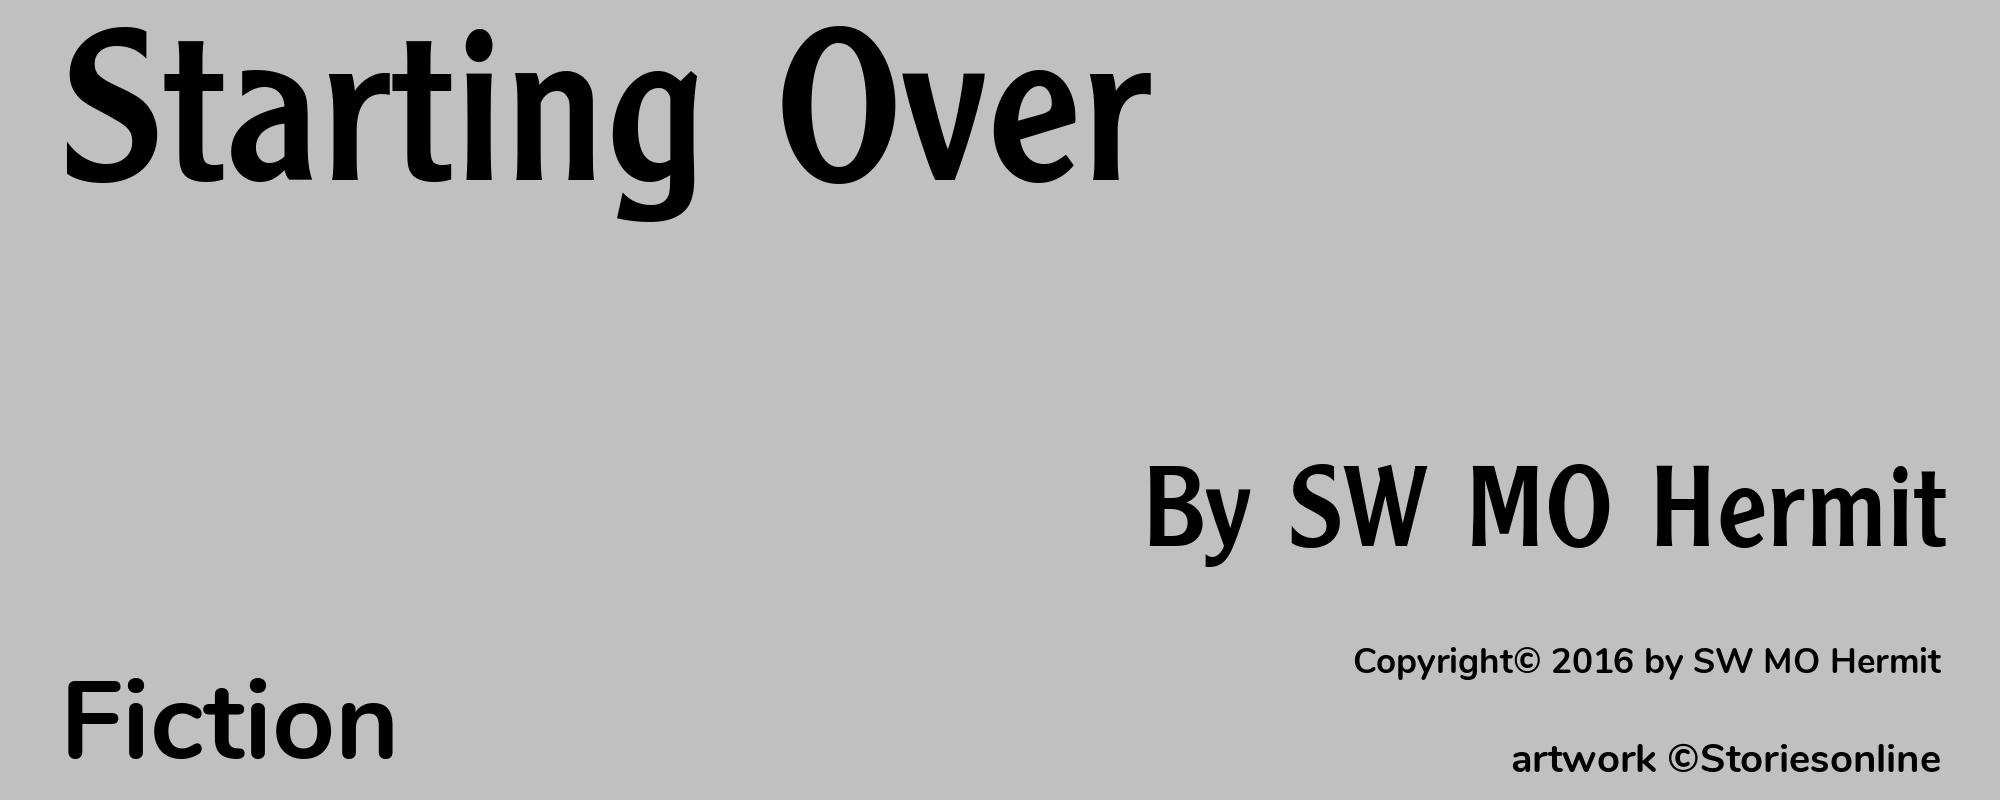 Starting Over - Cover